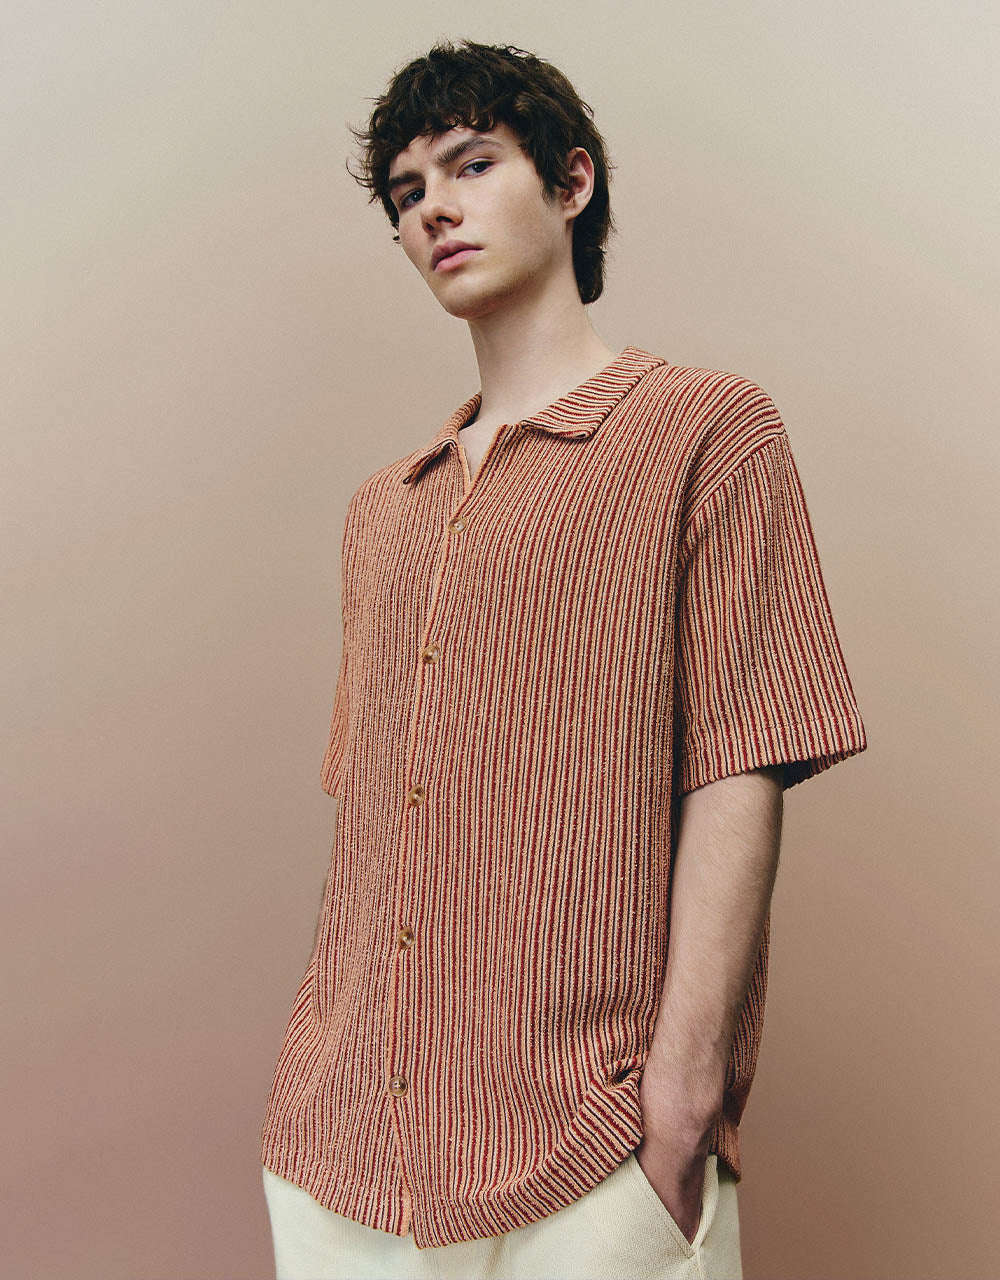 Lapel Knitted T-Shirt